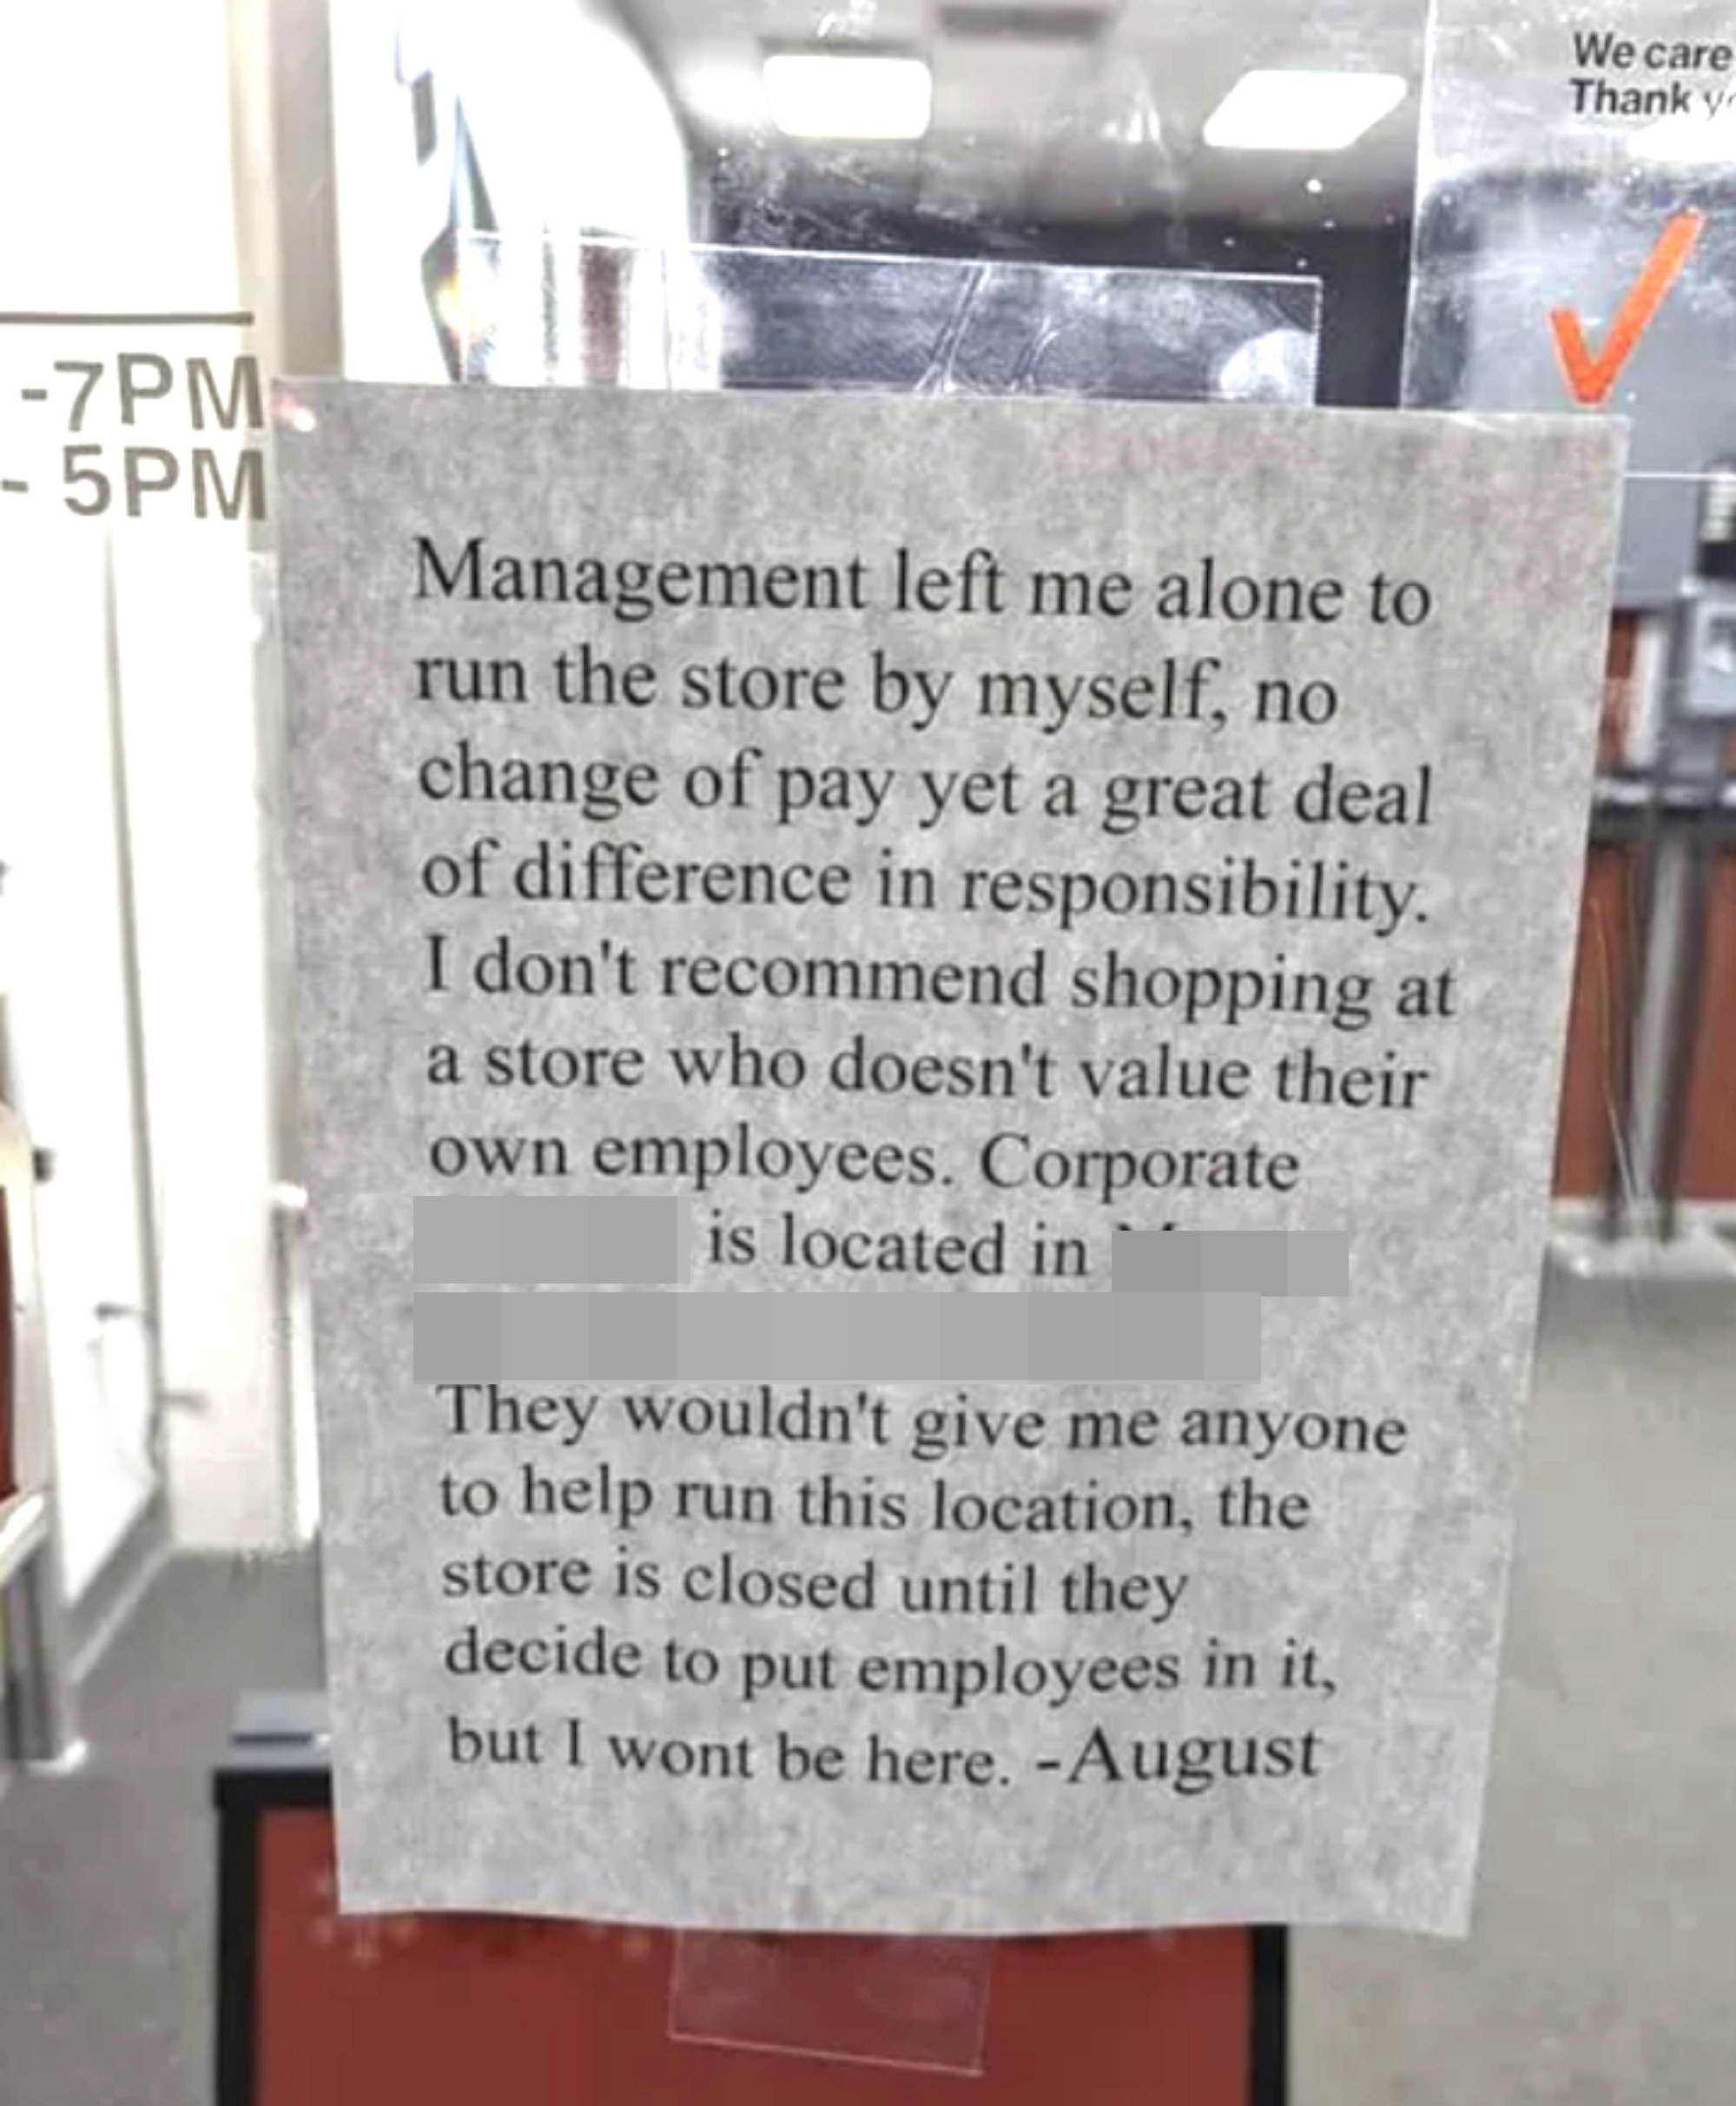 &quot;Management left me alone to run the store by myself...&quot;